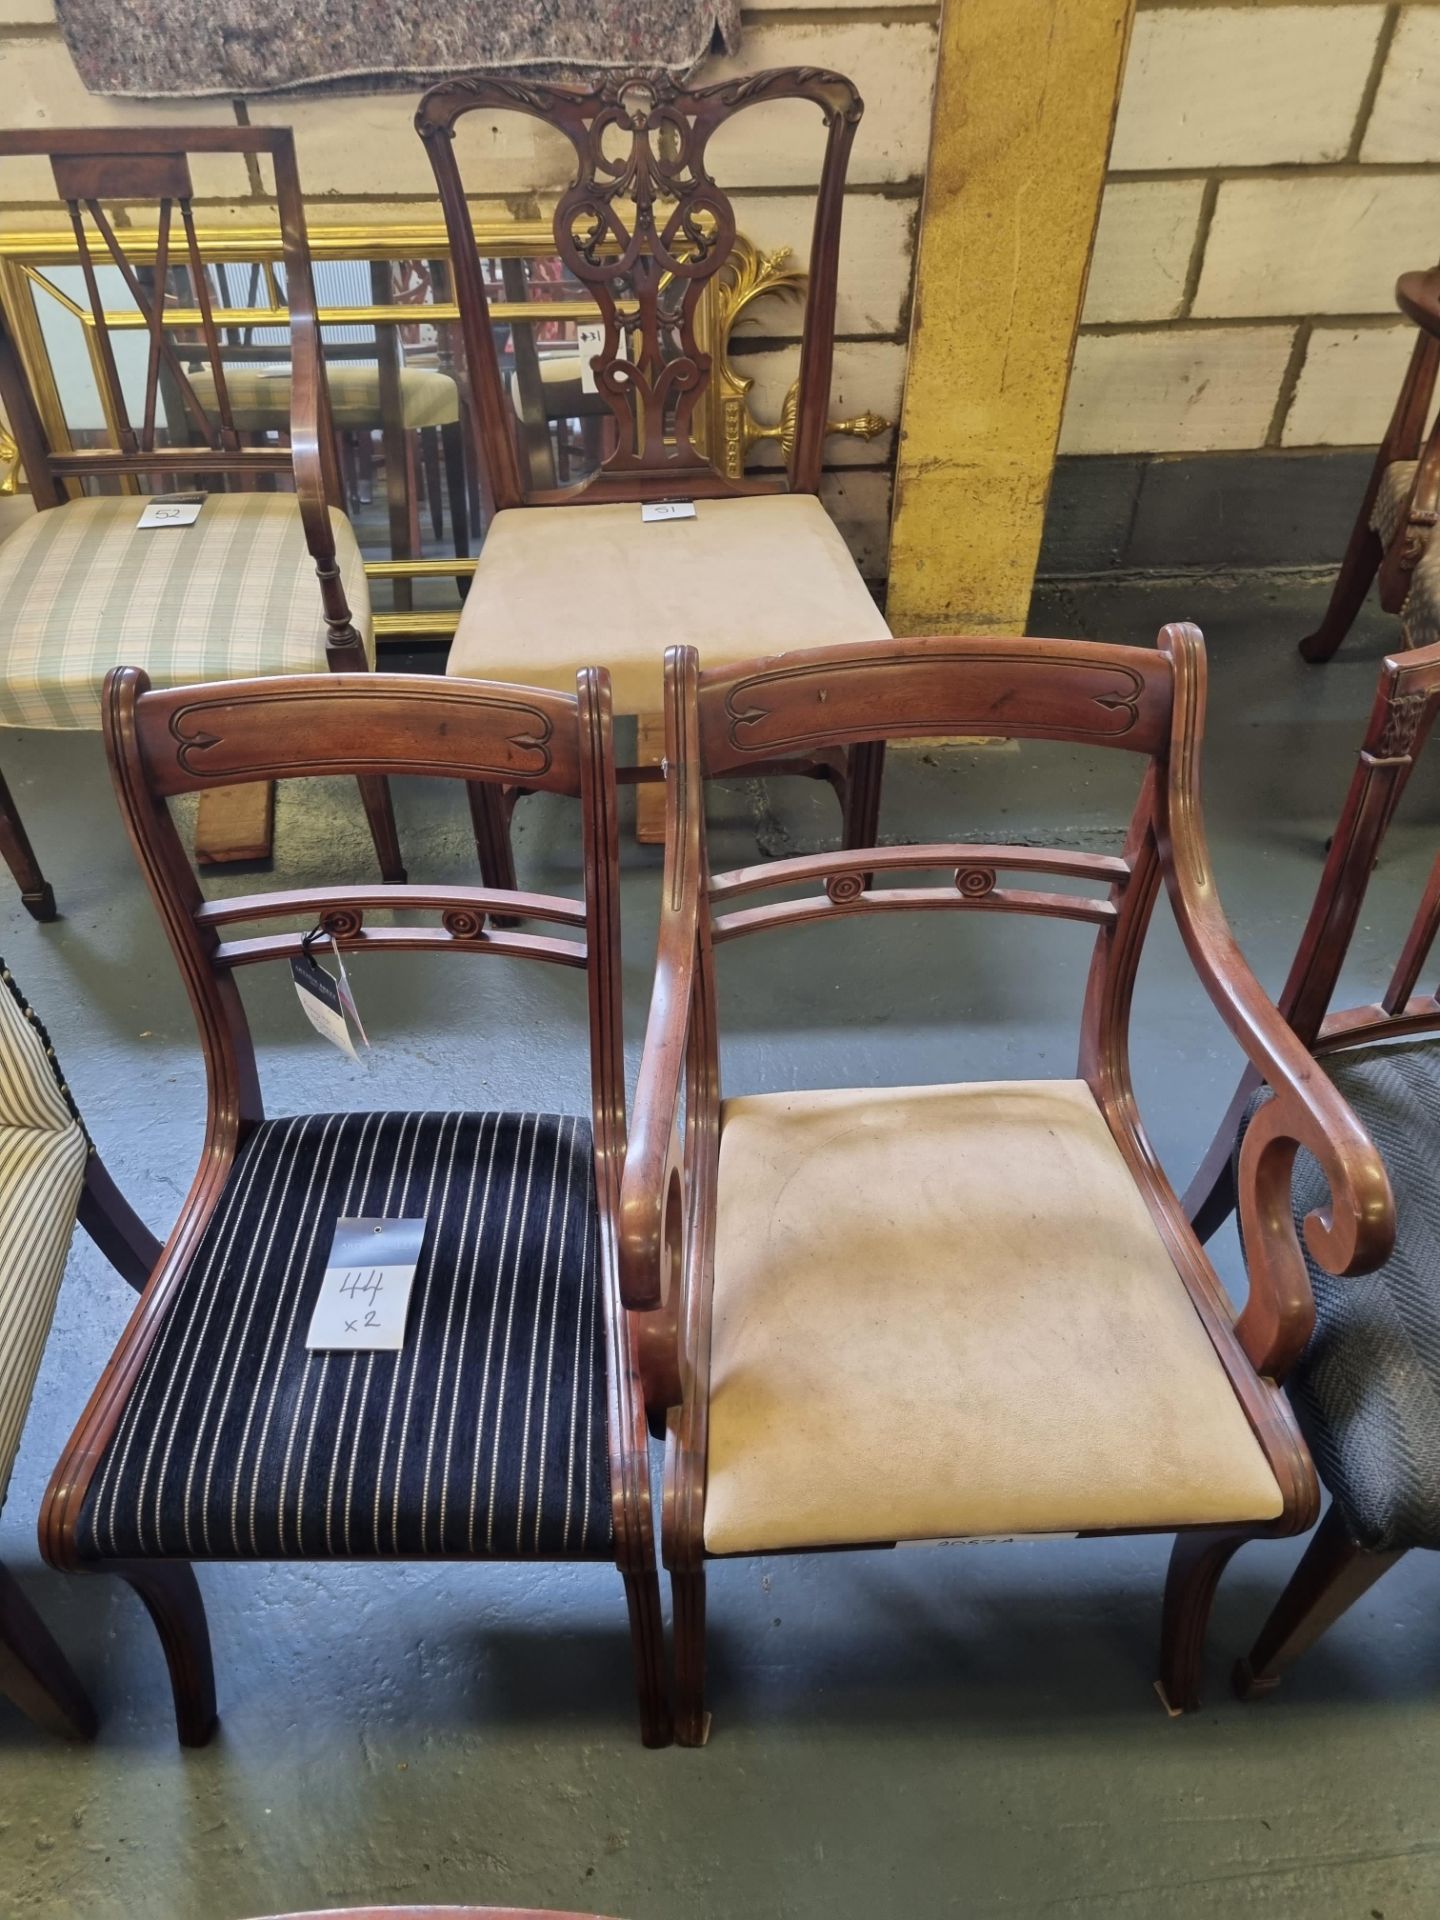 2 X Arthur Brett Regency-Style Mahogany Dining Chairs Upholstered On Sabre Legs With Drop In Seat,